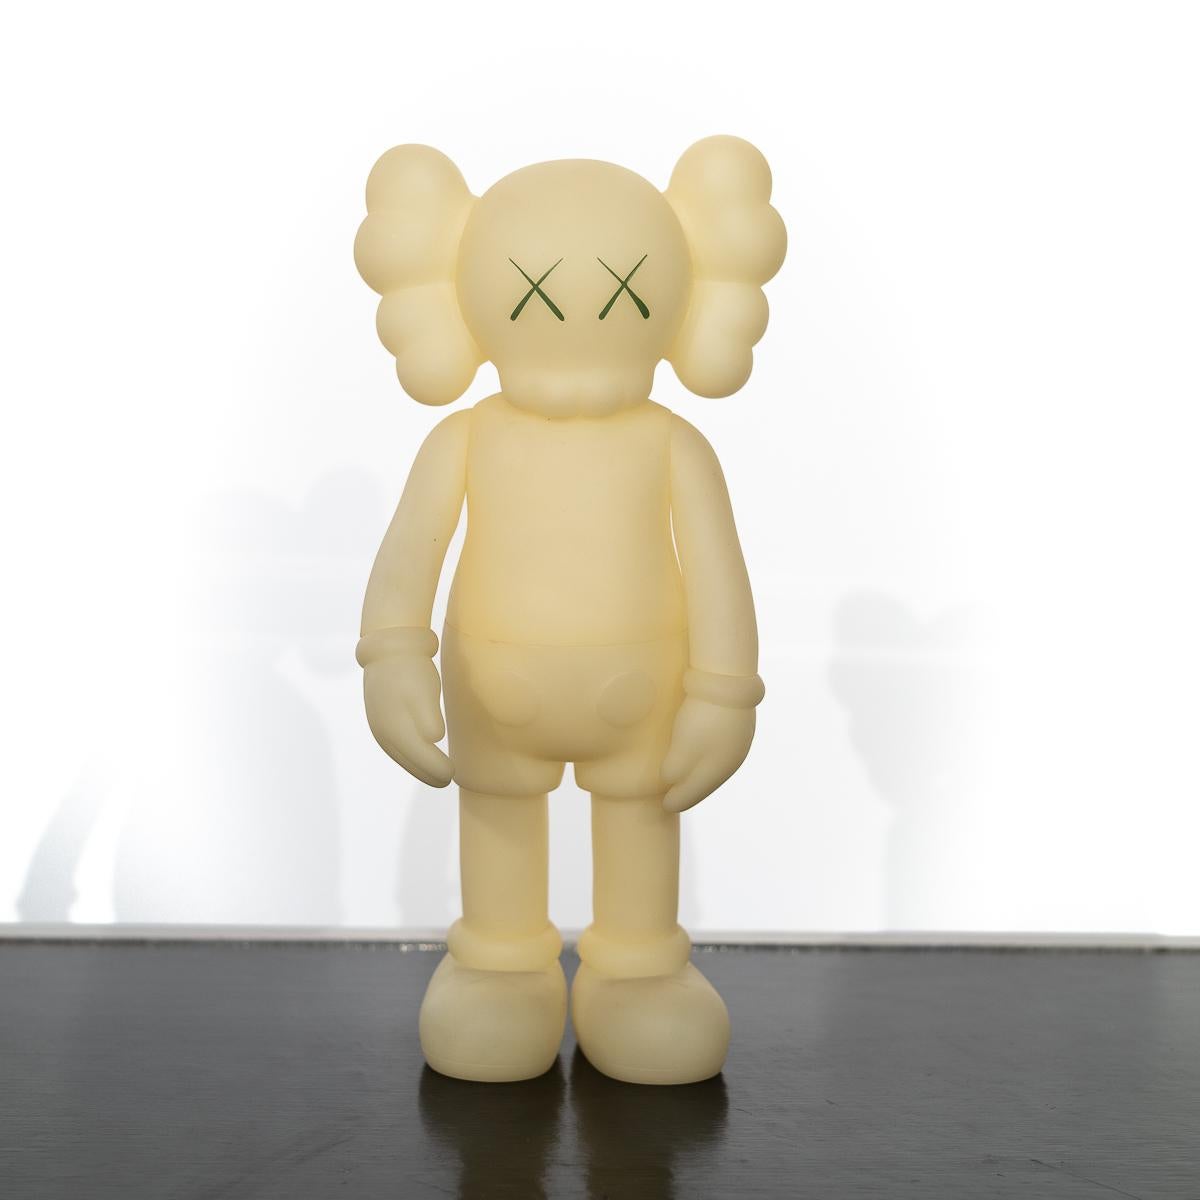 KAWS - KAWS WHAT PARTY set of 2 works (KAWS Companion) For Sale at 